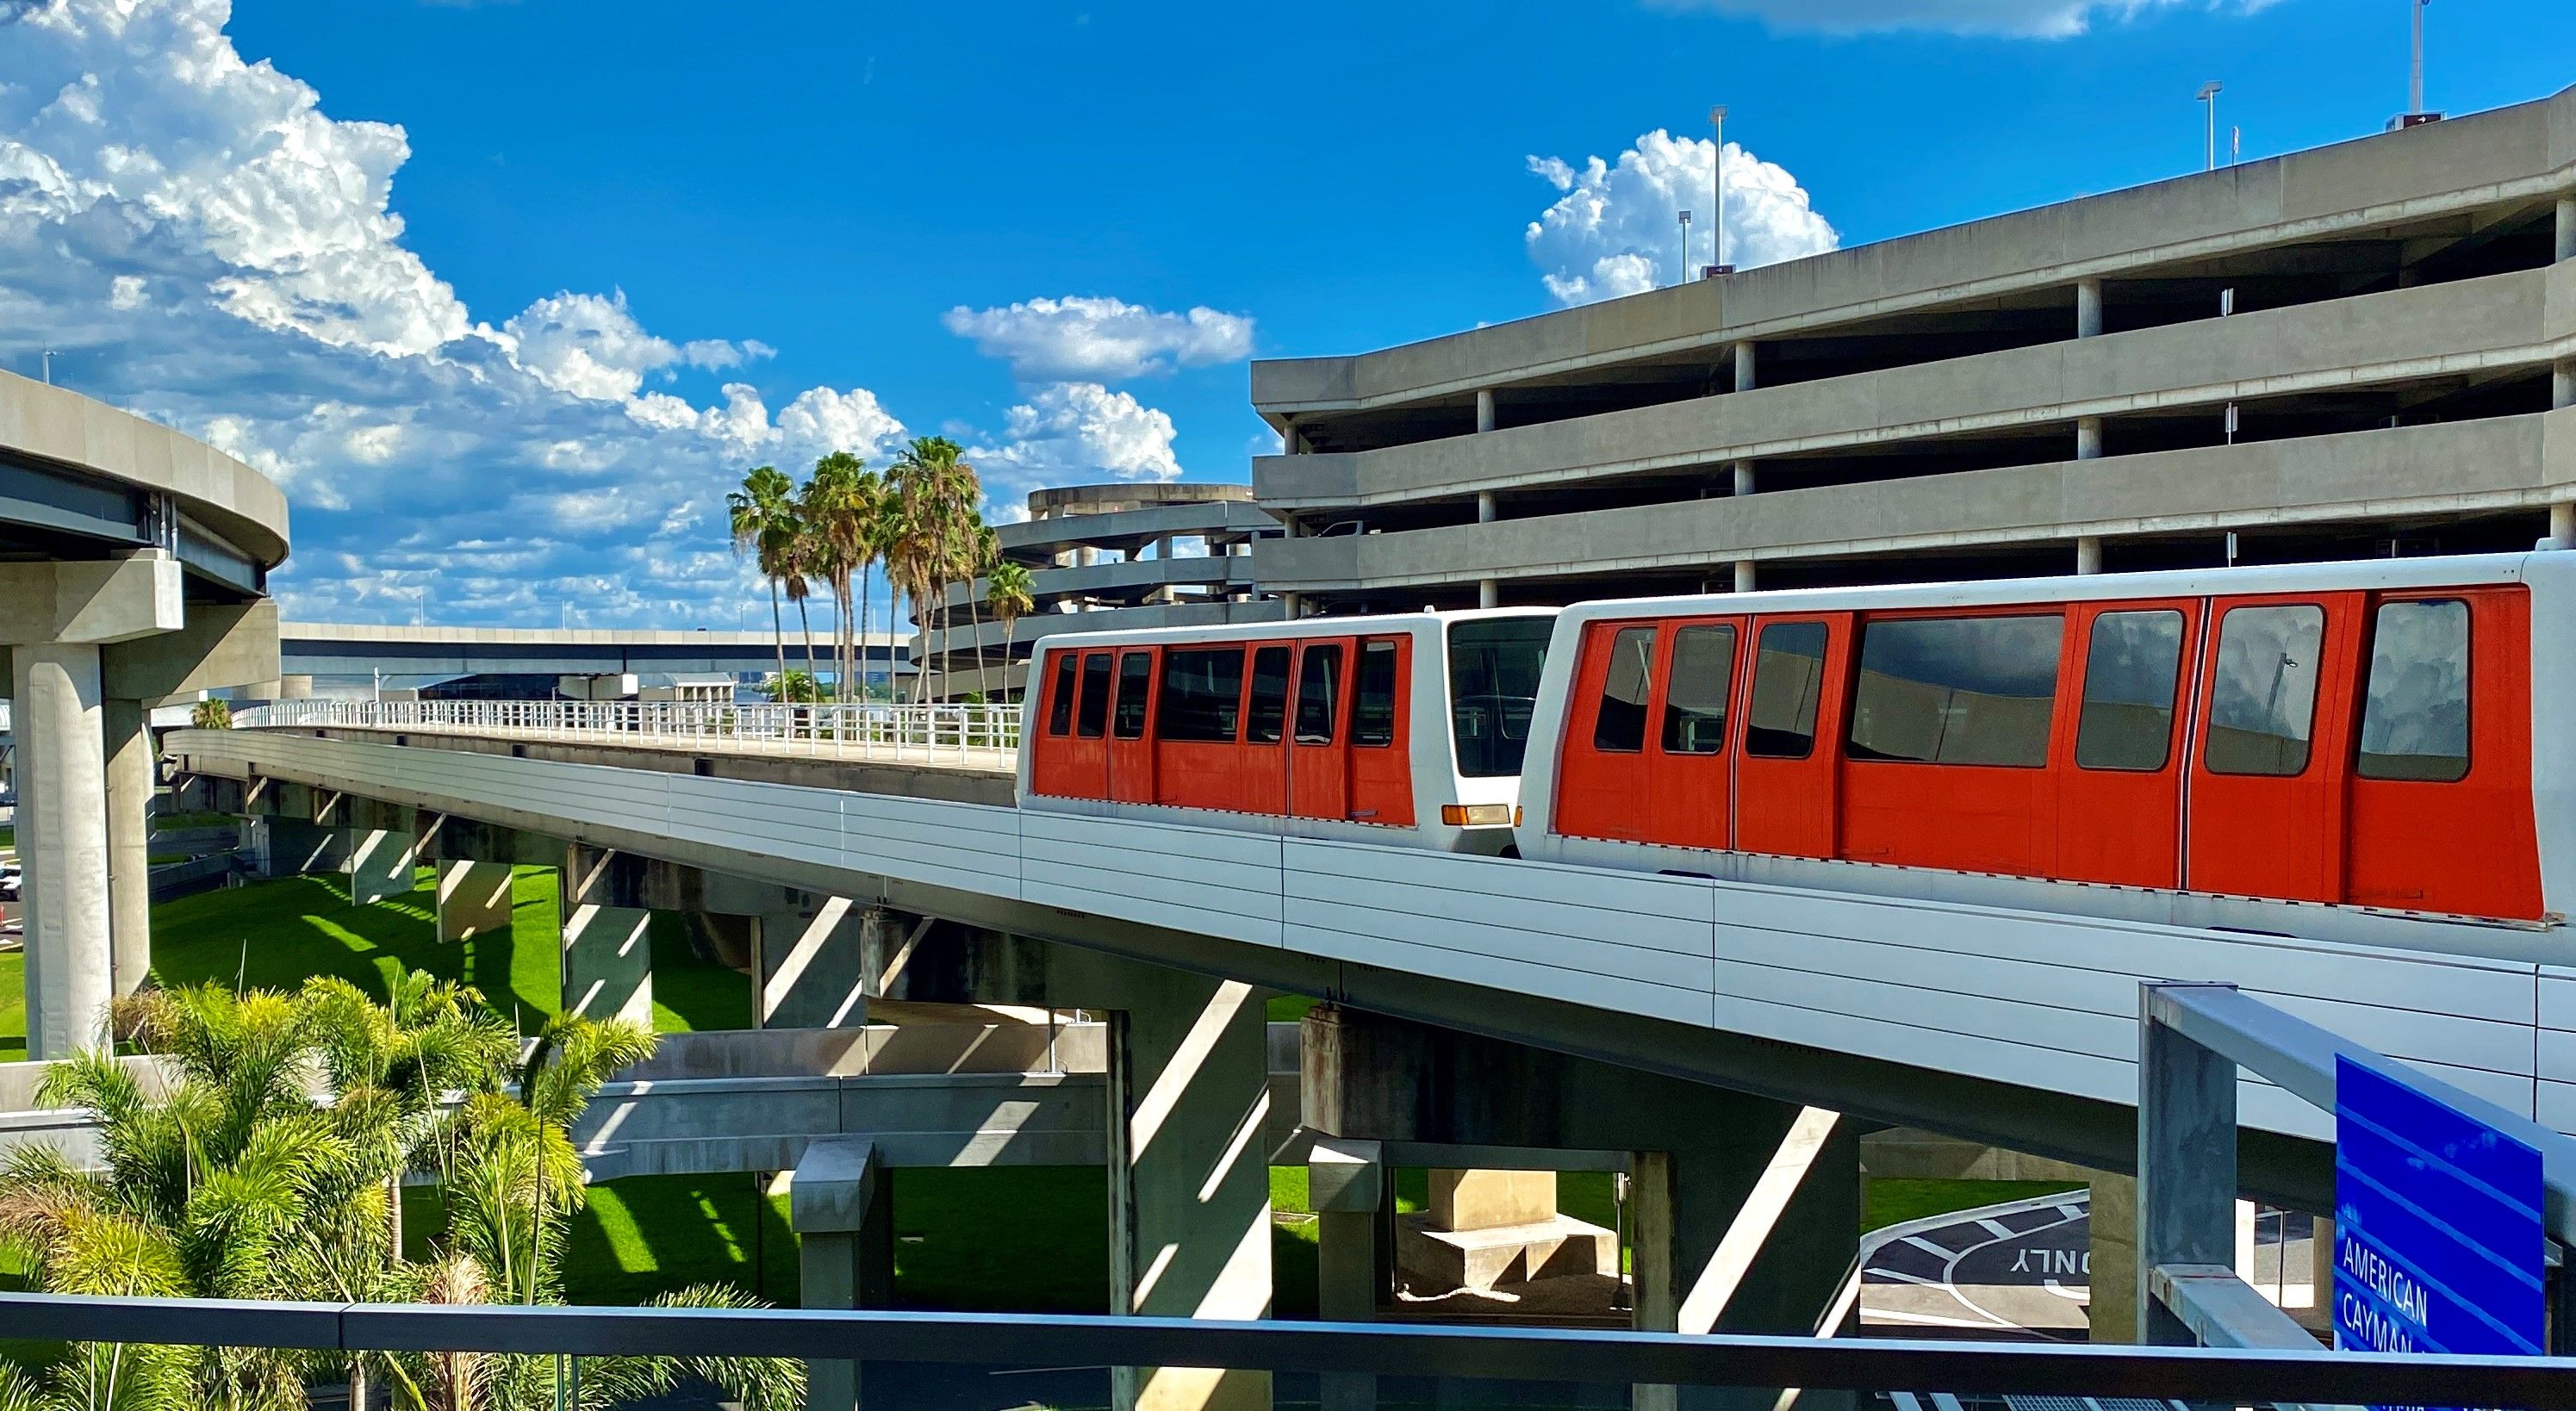 Tampa International Airport Red Shuttle moving on the rail.